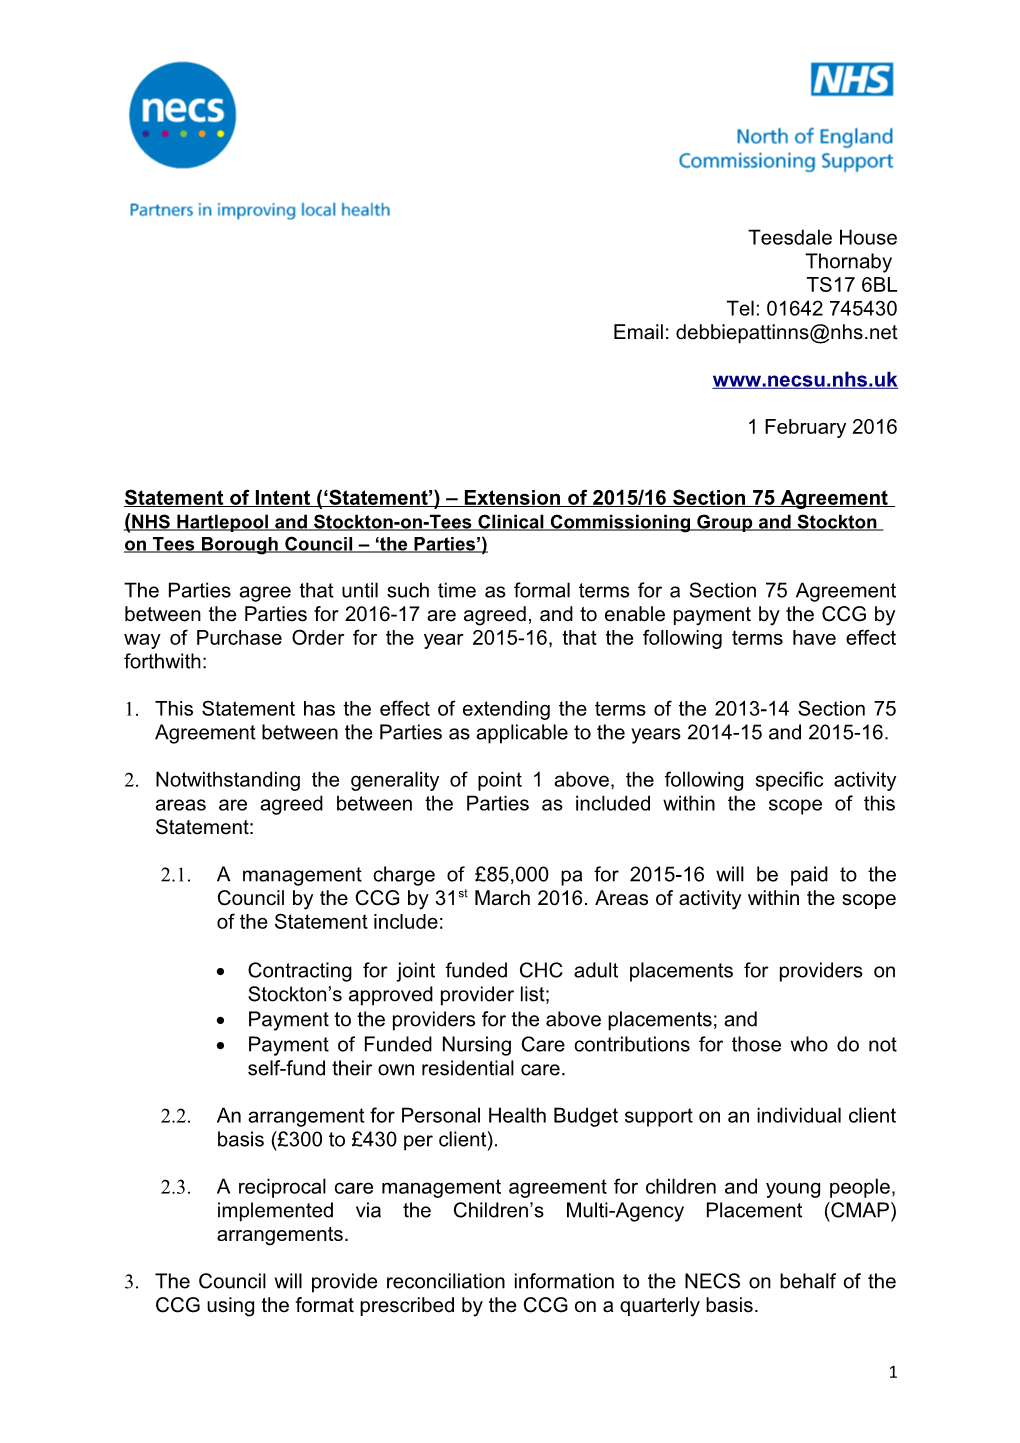 Statement of Intent ( Statement ) Extension of 2015/16 Section 75Agreement(NHS Hartlepool